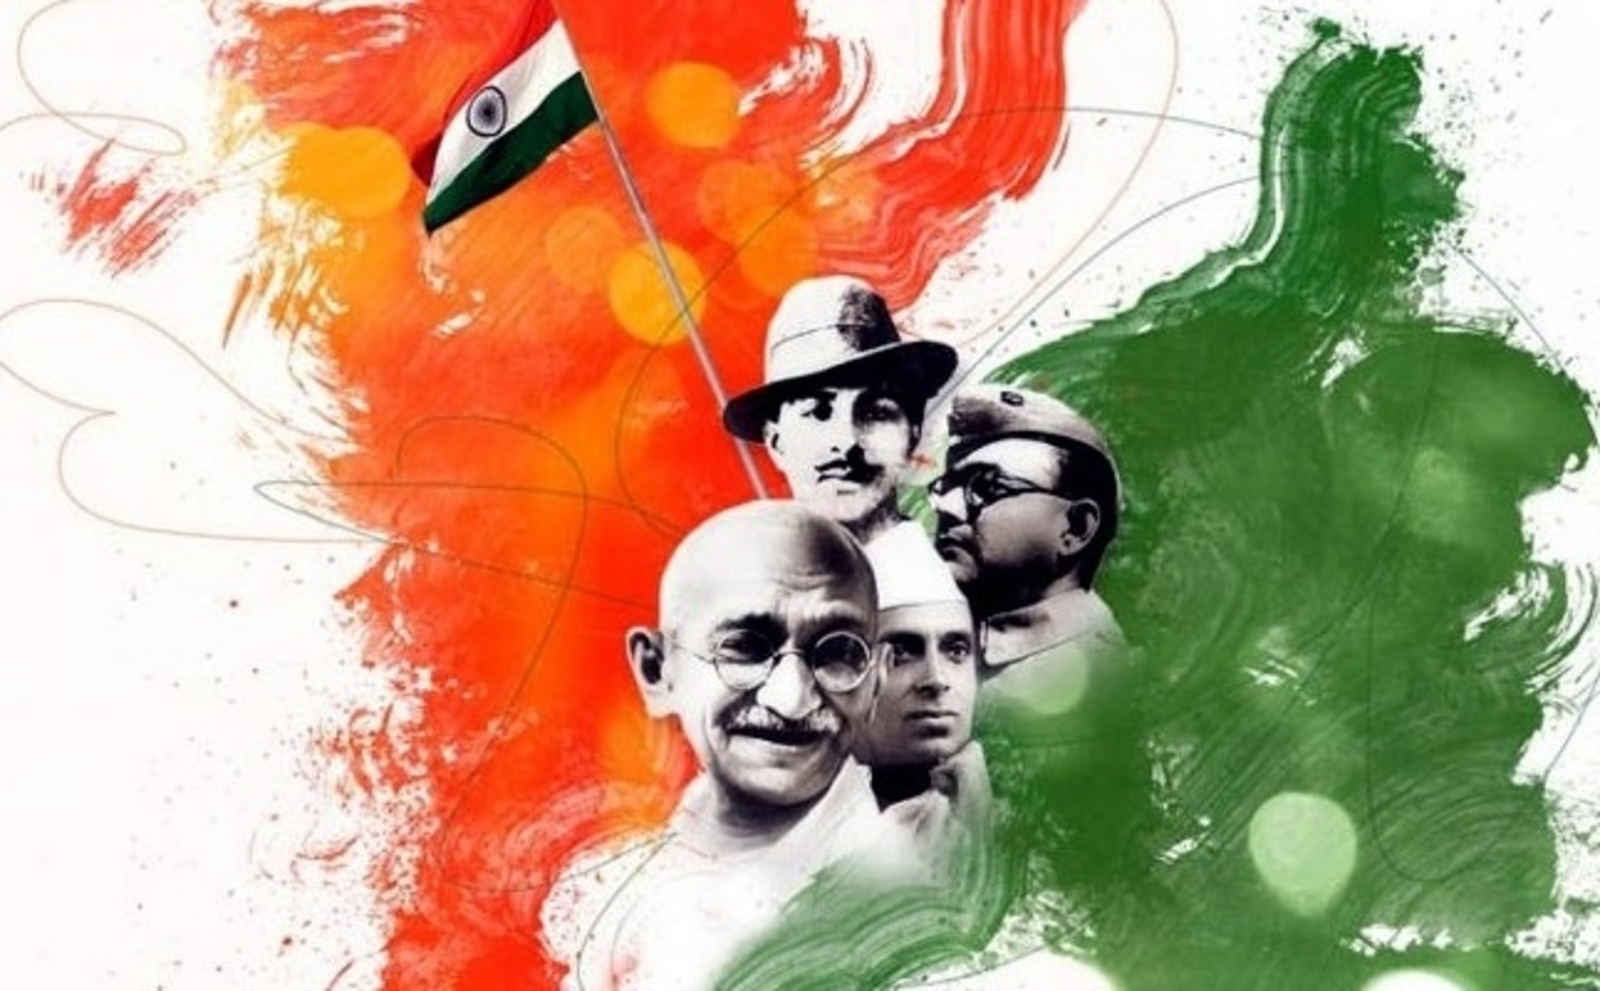 Independence Day 2023 Drawings and Posters Making for 15 August